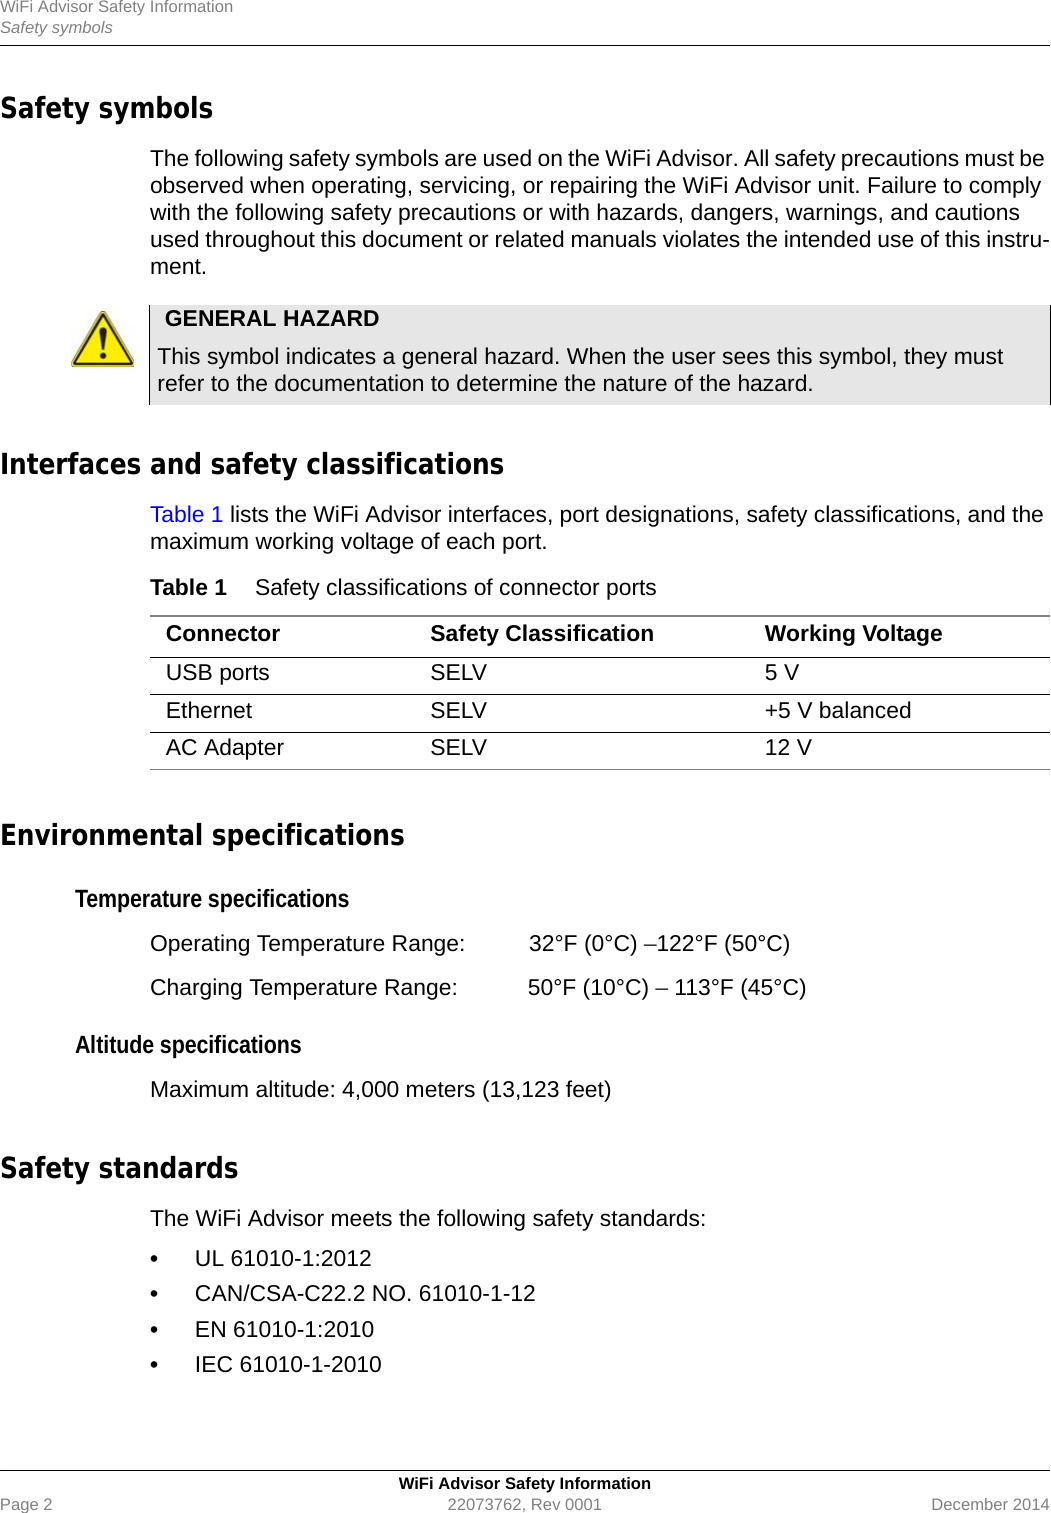 WiFi Advisor Safety InformationSafety symbolsWiFi Advisor Safety InformationPage 2 22073762, Rev 0001 December 2014Safety symbols The following safety symbols are used on the WiFi Advisor. All safety precautions must be observed when operating, servicing, or repairing the WiFi Advisor unit. Failure to comply with the following safety precautions or with hazards, dangers, warnings, and cautions used throughout this document or related manuals violates the intended use of this instru-ment.Interfaces and safety classificationsTable 1 lists the WiFi Advisor interfaces, port designations, safety classifications, and the maximum working voltage of each port.Environmental specificationsTemperature specificationsOperating Temperature Range:  32°F (0°C) –122°F (50°C)Charging Temperature Range:  50°F (10°C) – 113°F (45°C)Altitude specificationsMaximum altitude: 4,000 meters (13,123 feet)Safety standardsThe WiFi Advisor meets the following safety standards:•UL 61010-1:2012•CAN/CSA-C22.2 NO. 61010-1-12•EN 61010-1:2010•IEC 61010-1-2010GENERAL HAZARDThis symbol indicates a general hazard. When the user sees this symbol, they must refer to the documentation to determine the nature of the hazard.Table 1 Safety classifications of connector portsConnector Safety Classification Working VoltageUSB ports SELV 5 VEthernet SELV +5 V balancedAC Adapter SELV 12 V